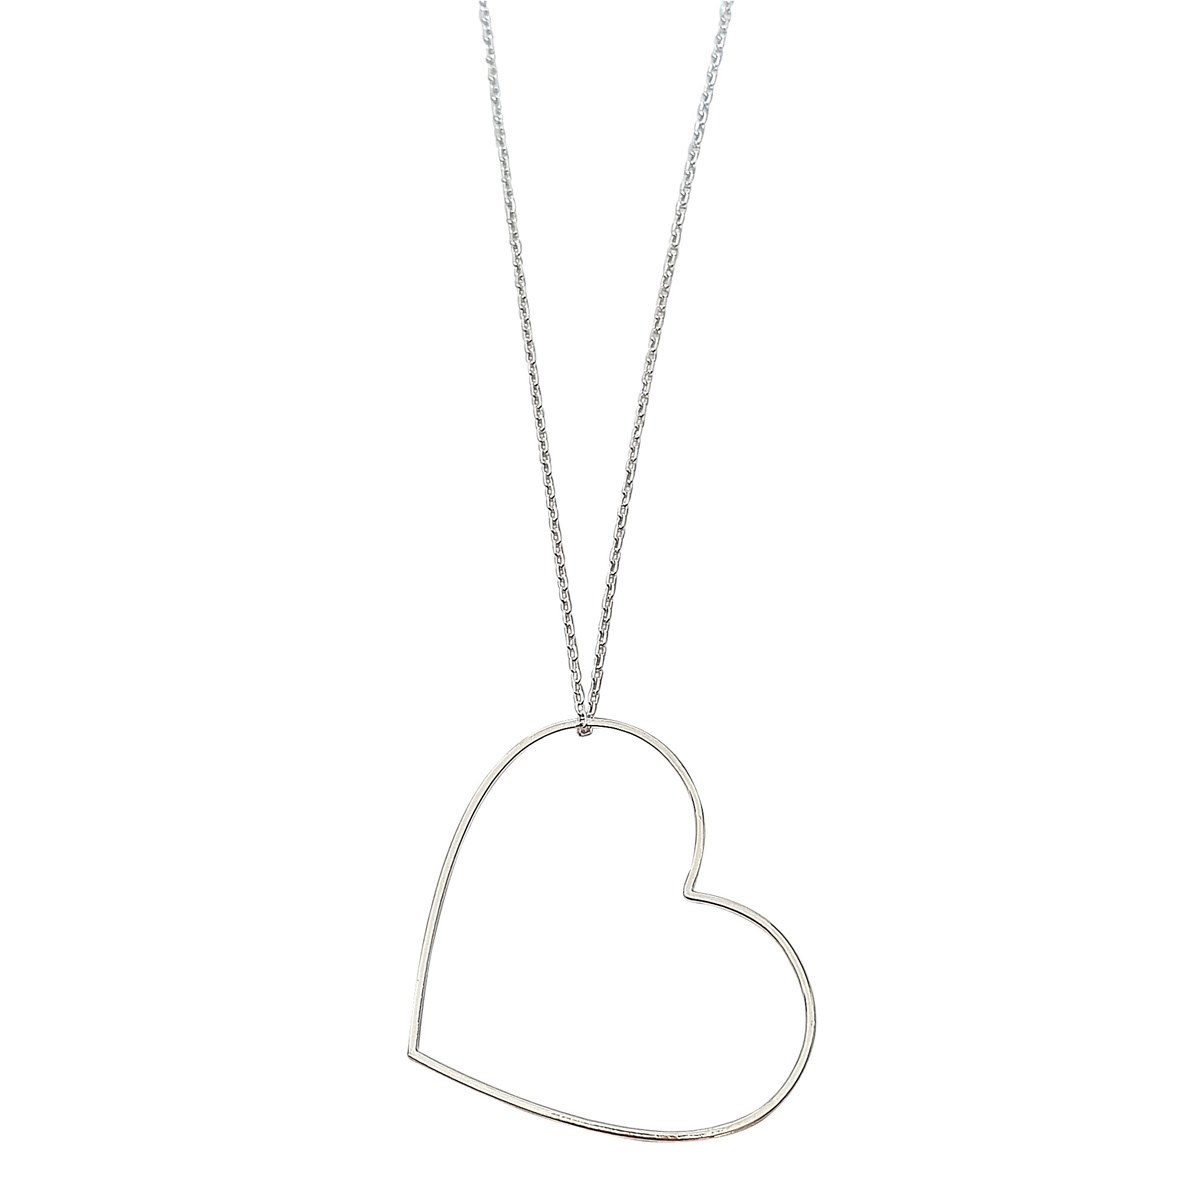 Collier Charly grand coeur argent 60 cm